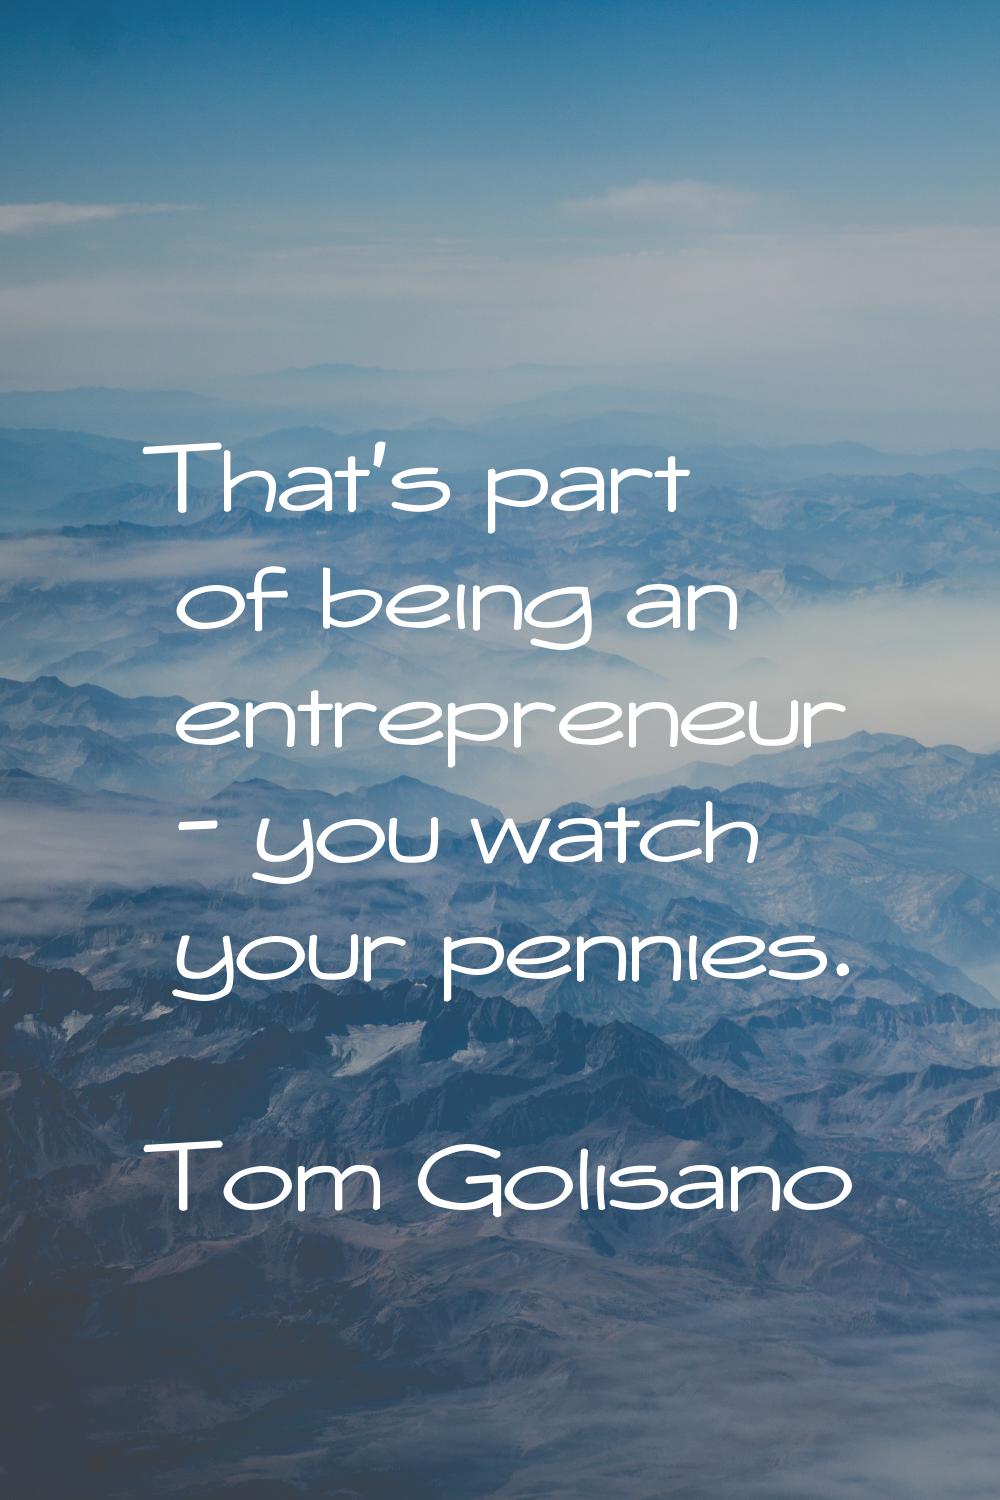 That's part of being an entrepreneur - you watch your pennies.